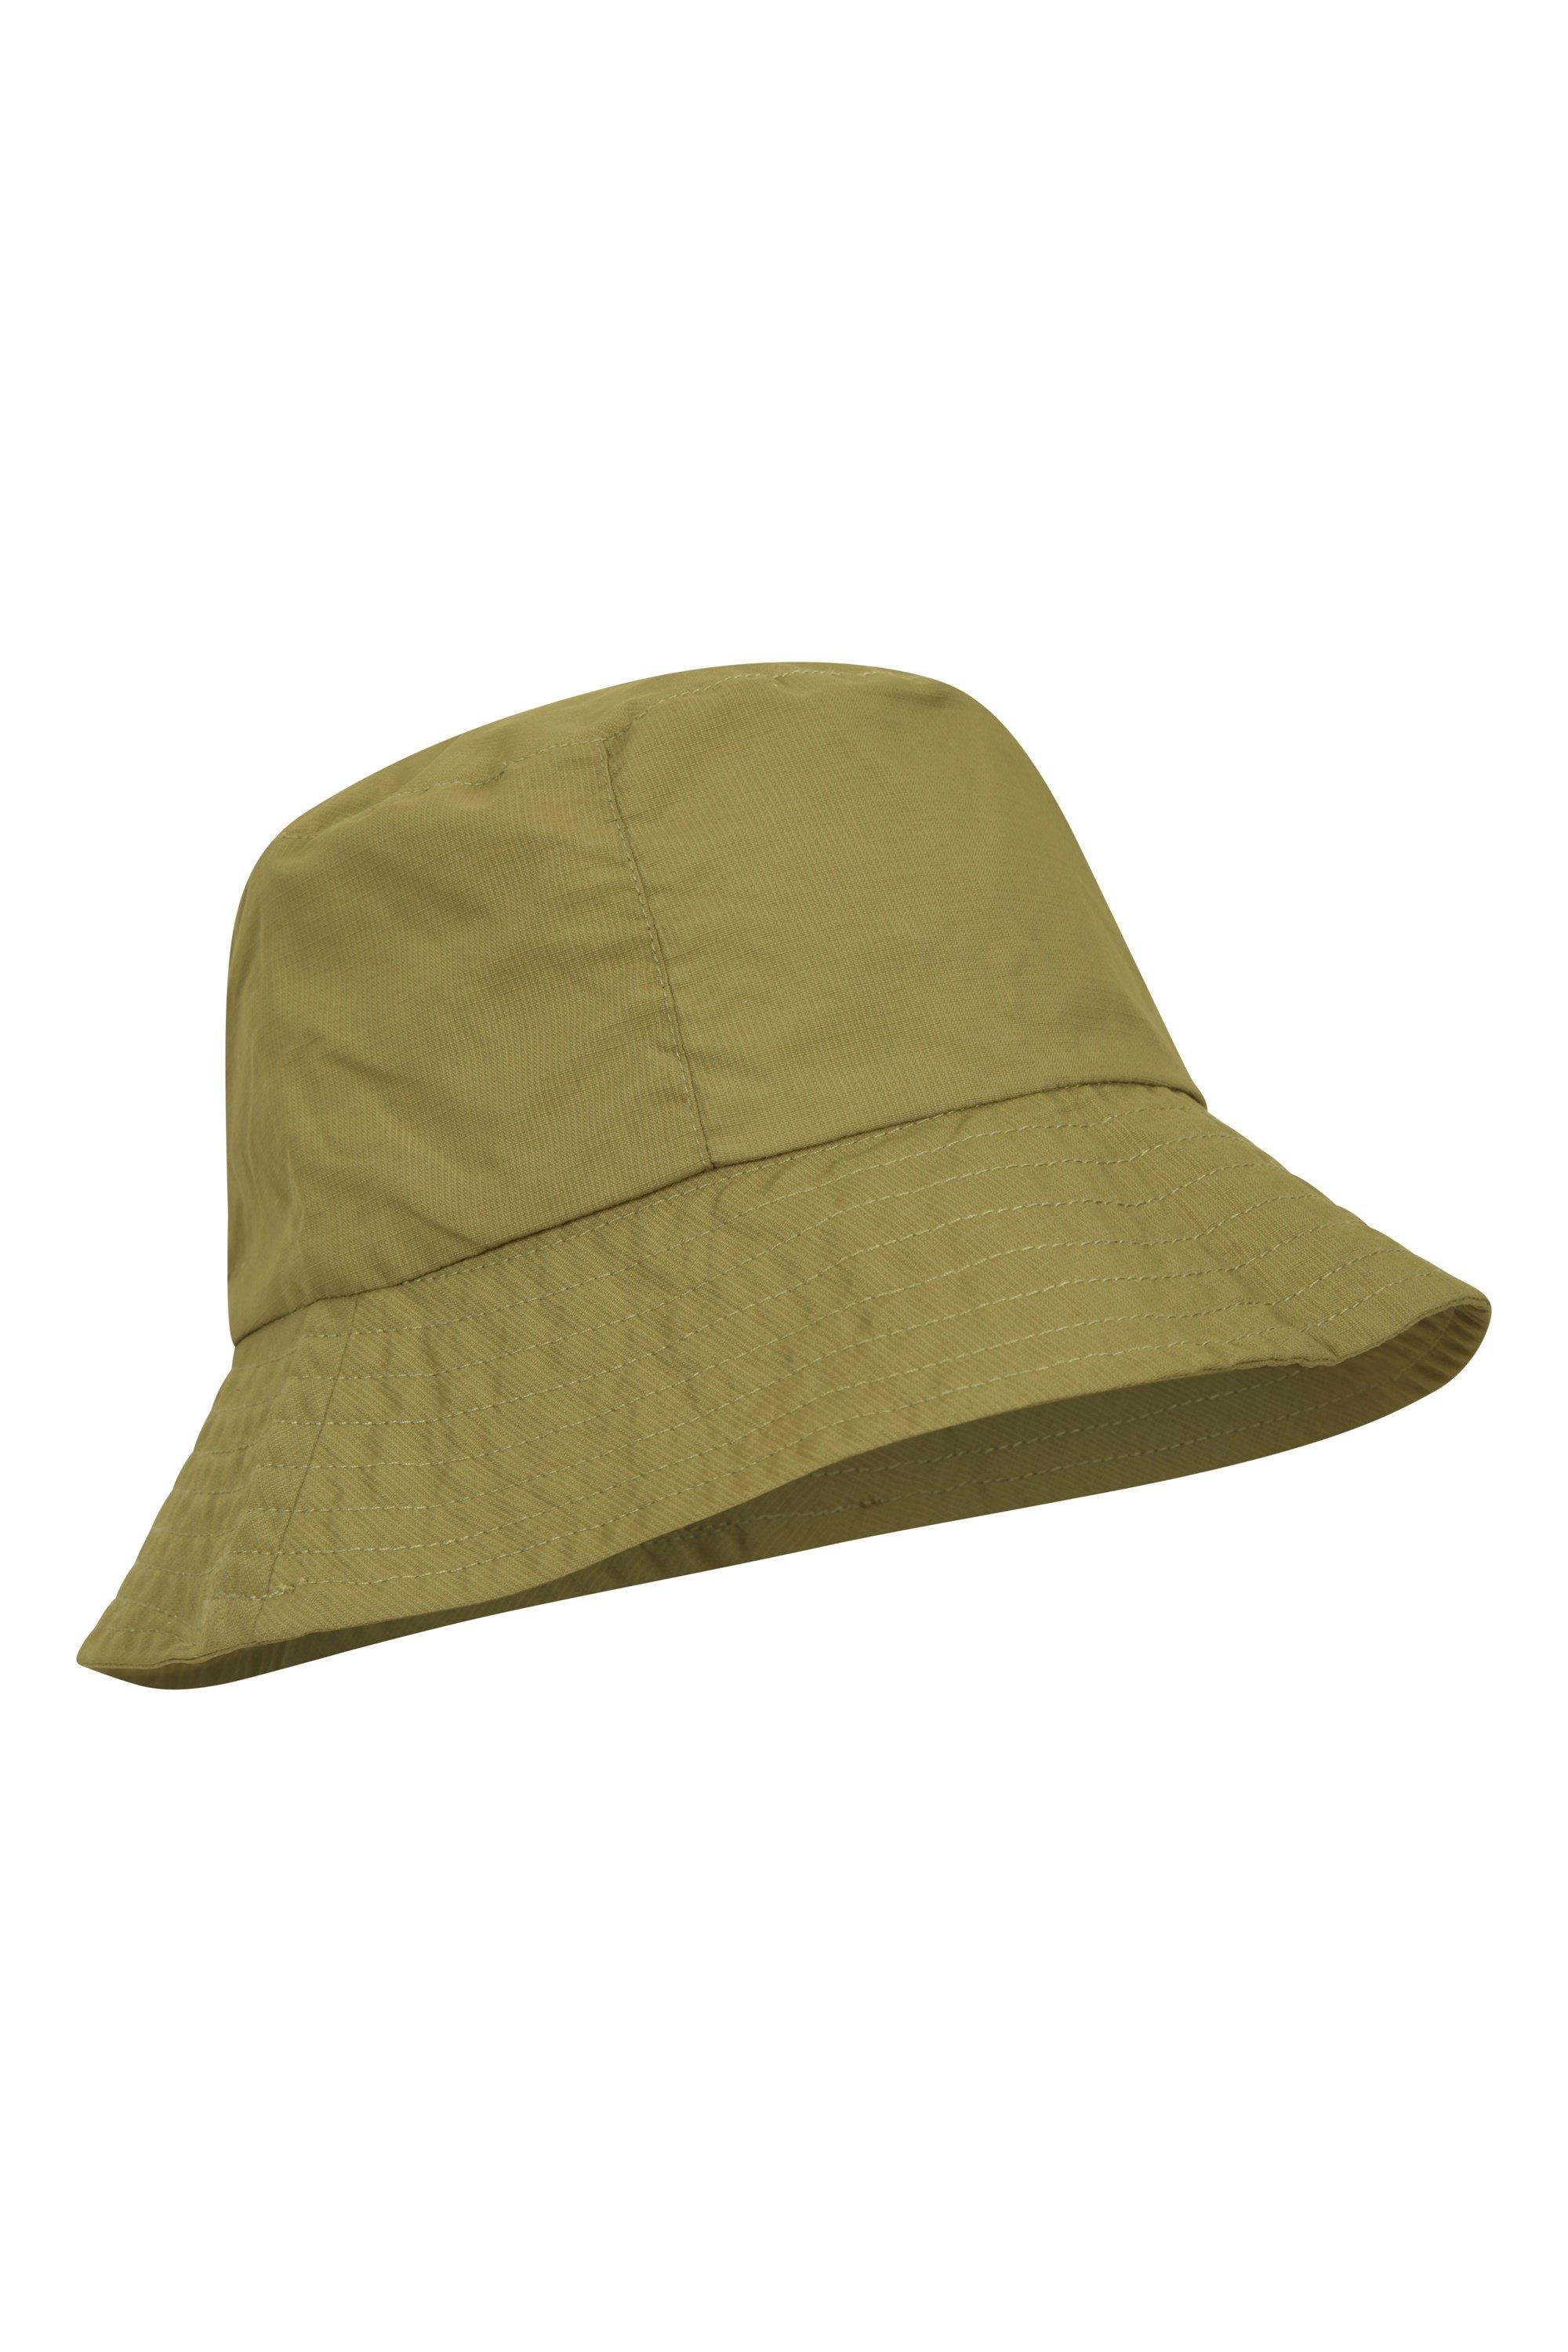 Mountain Warehouse Womens Packable Bucket Hat - Navy | Size One